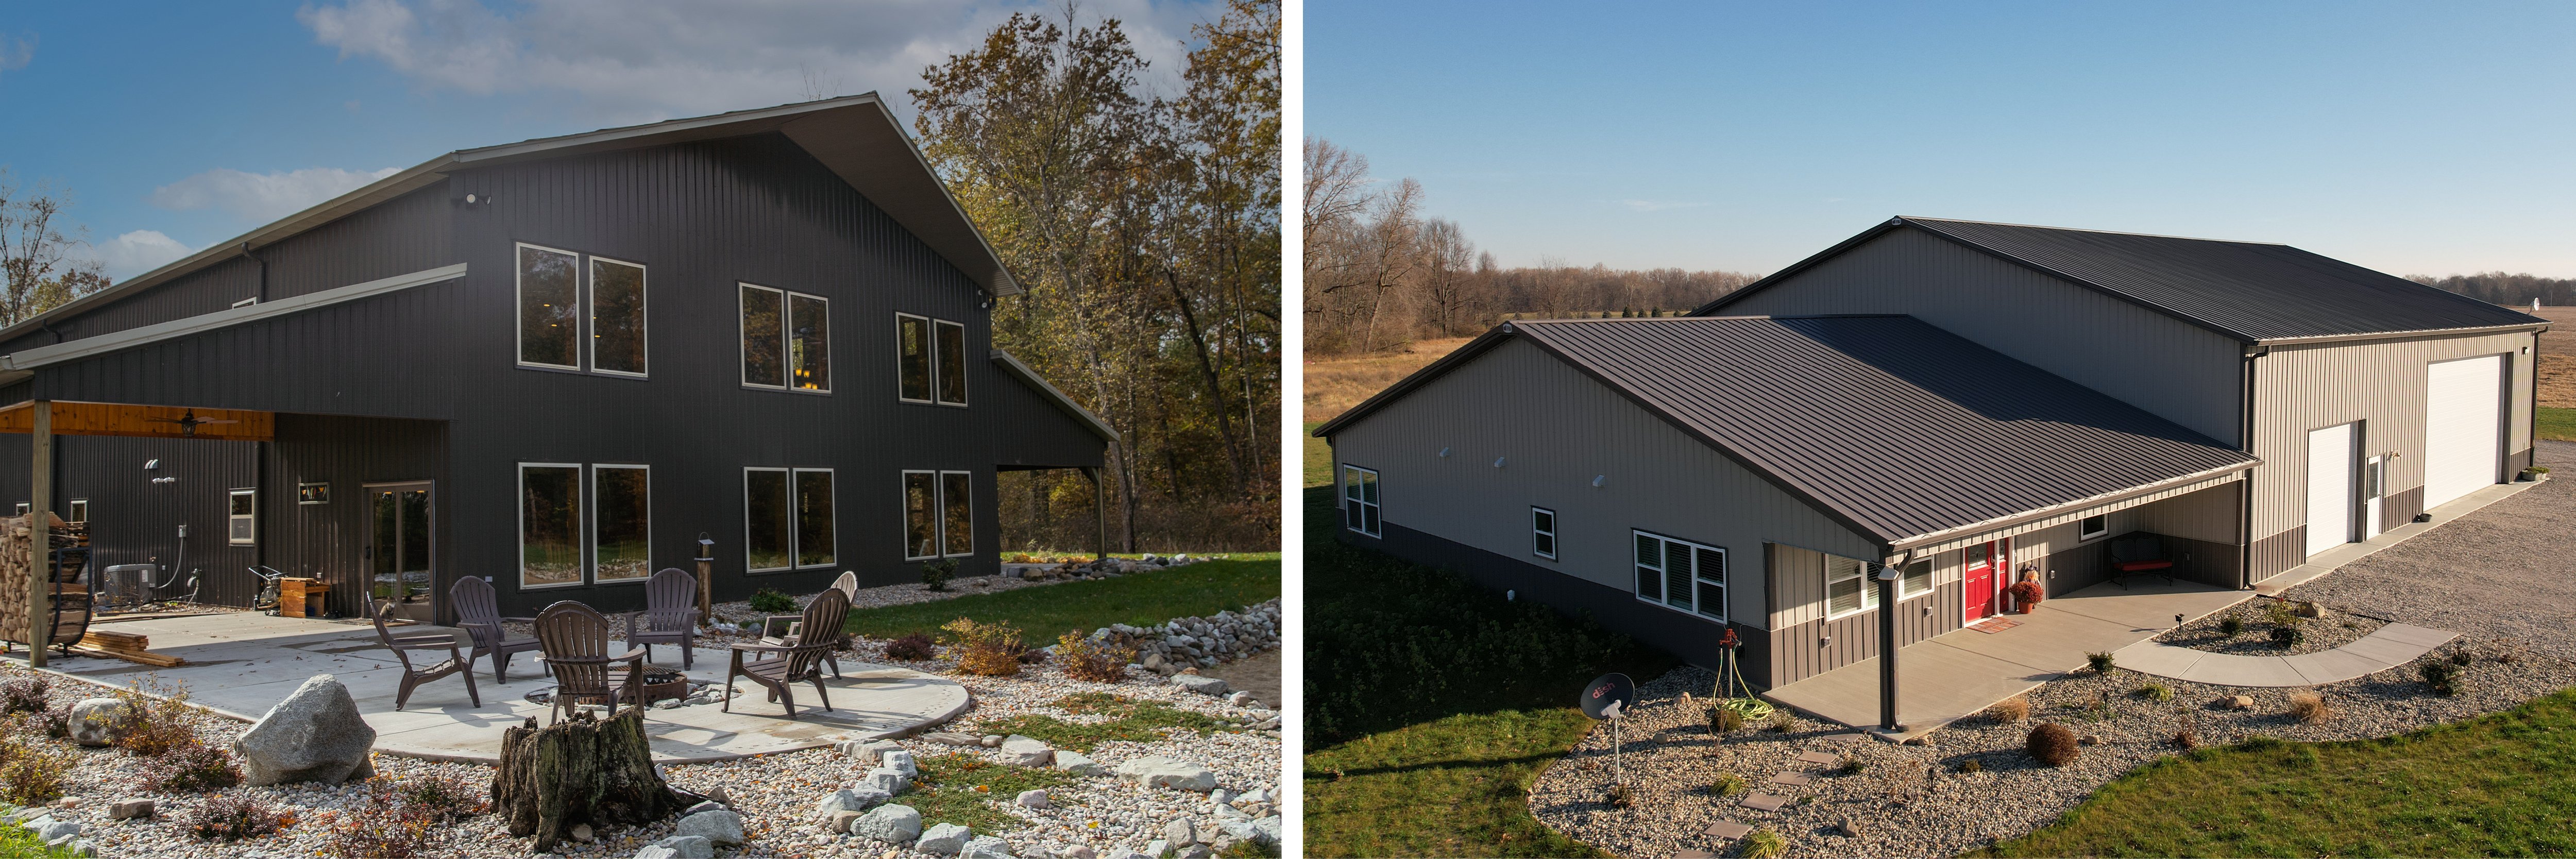 Barndominium vs. Shouse: What’s the Difference?